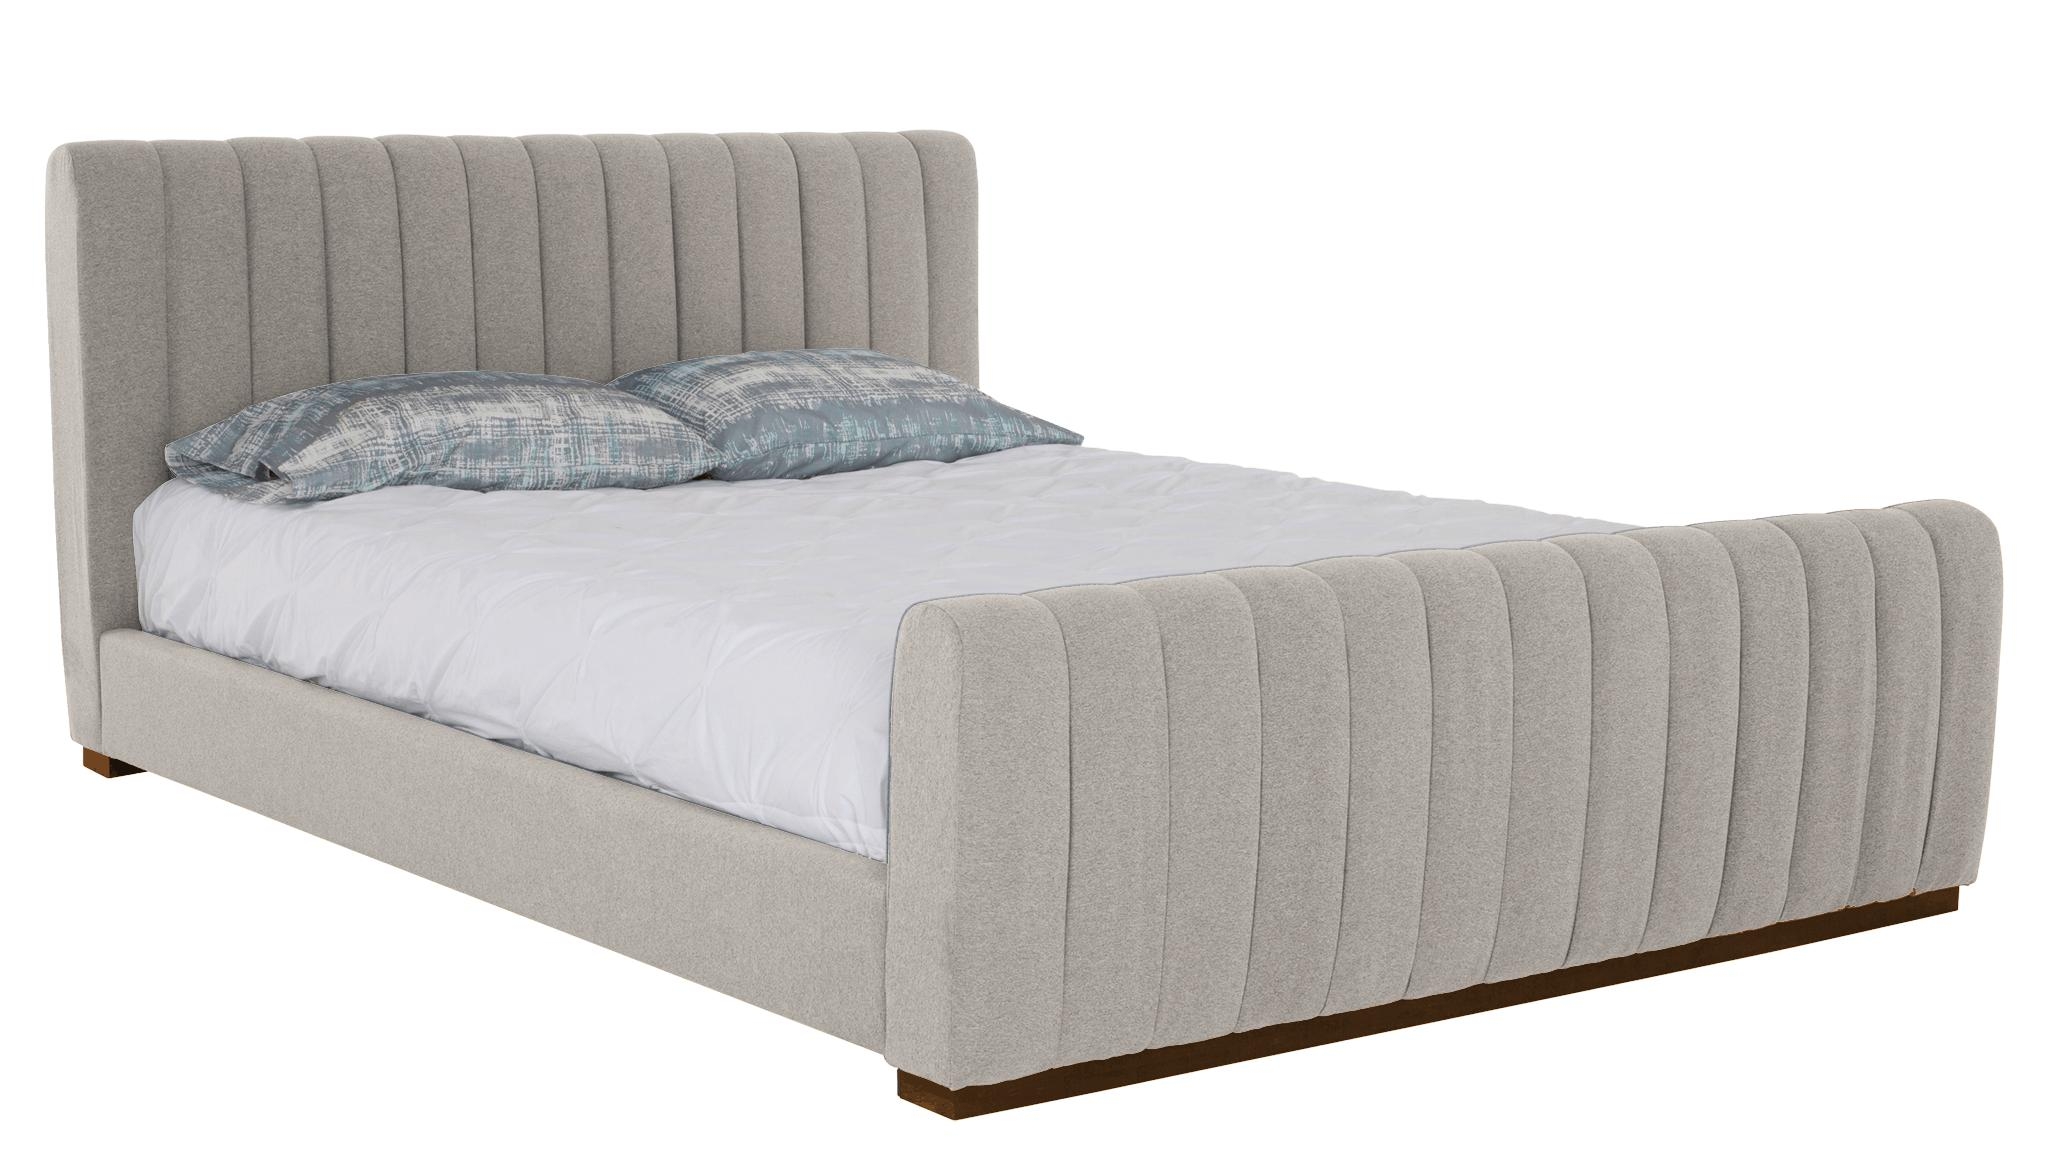 Gray Camille Mid Century Modern Bed - Prime Stone - Mocha - Eastern King - Image 1